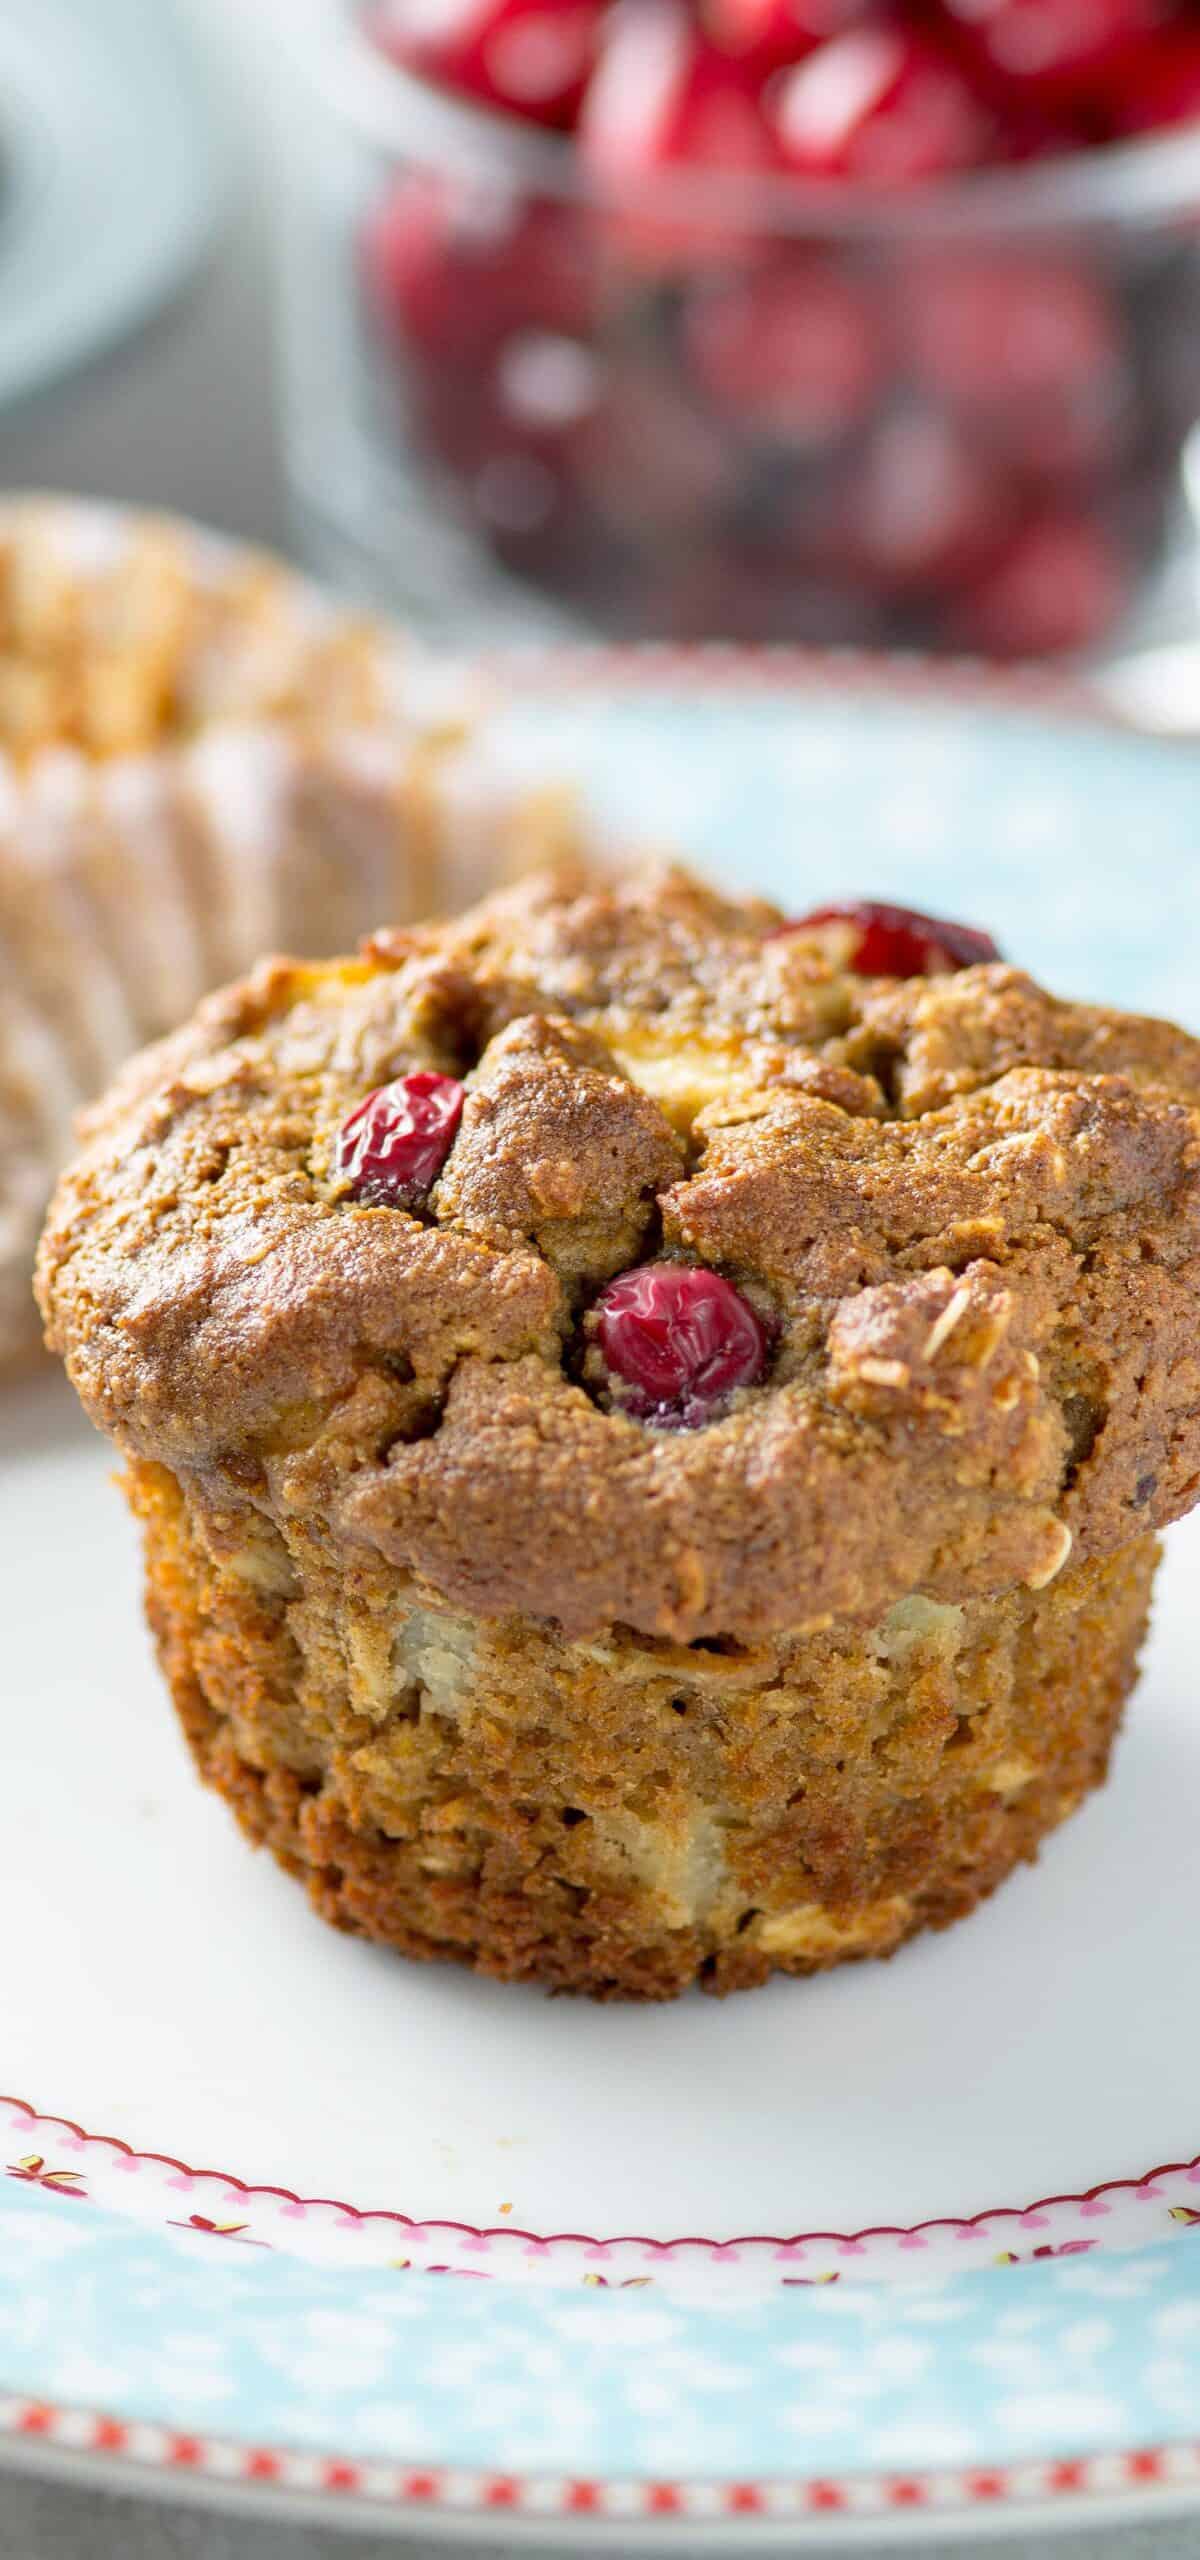  These muffins are loaded with tangy cranberry sauce, making every bite a burst of flavor.